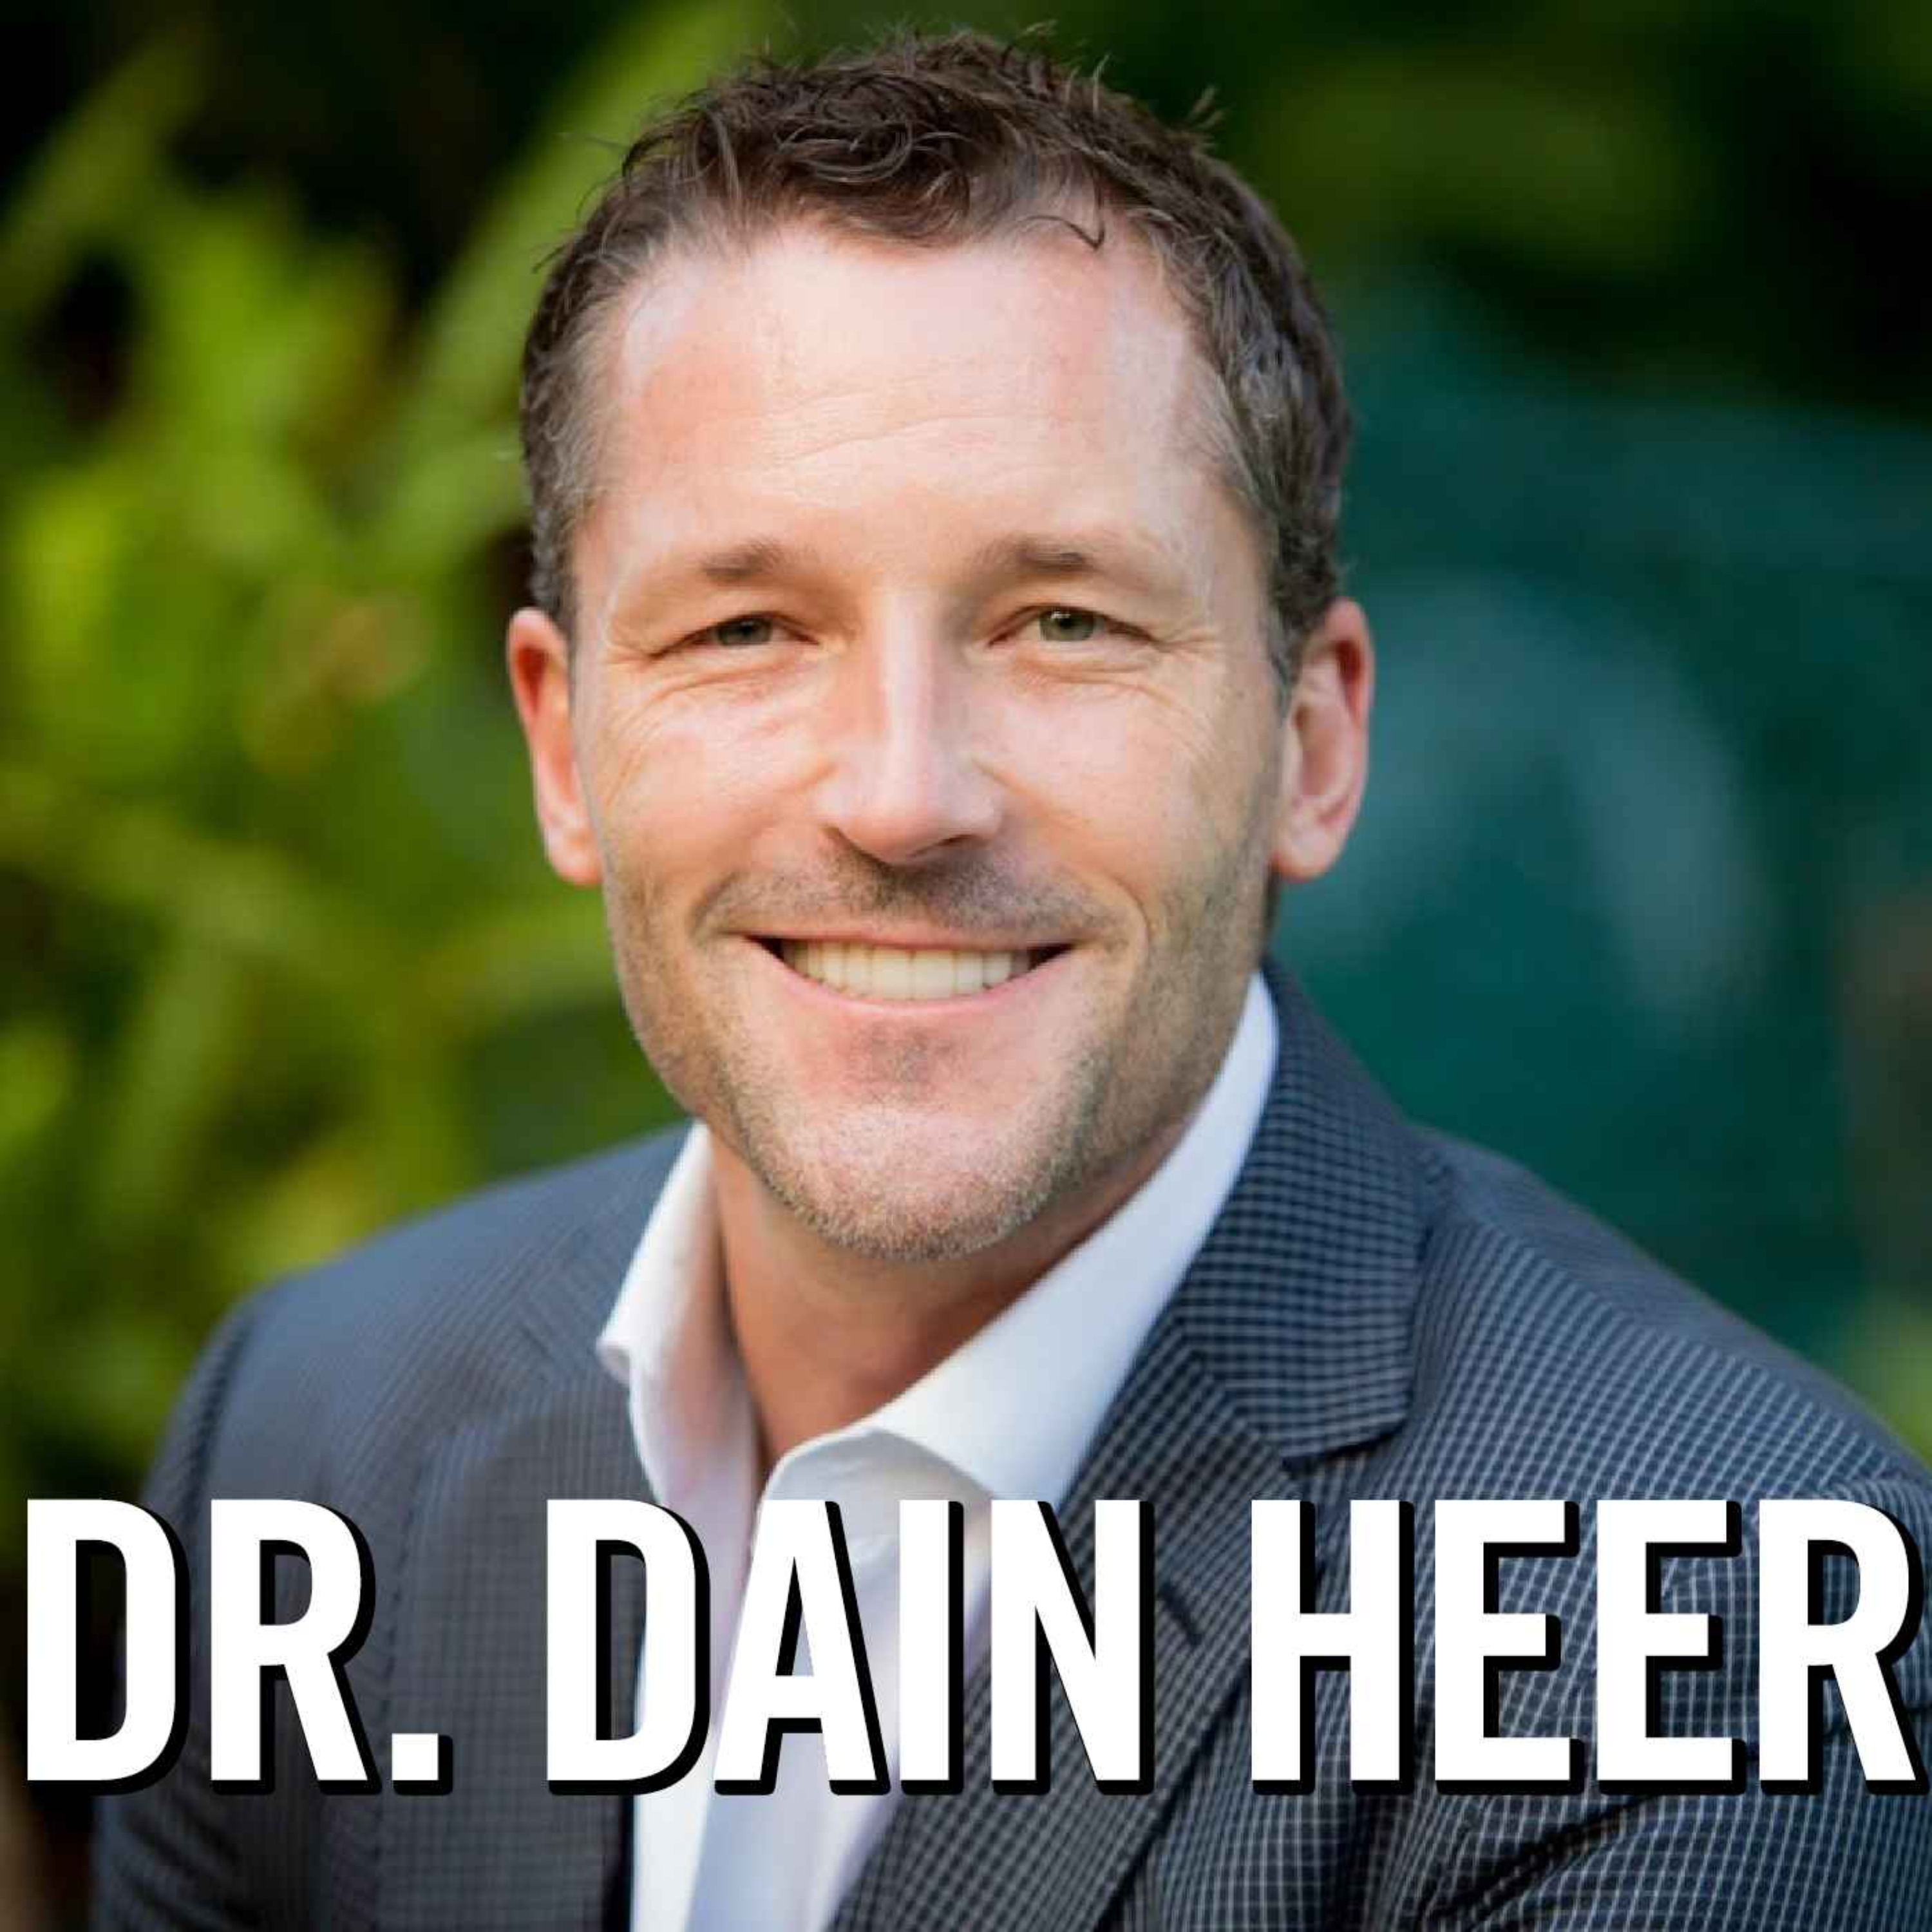 Return to sender! Mastering Your Mindset: A Conversation with Dr. Dain Heer